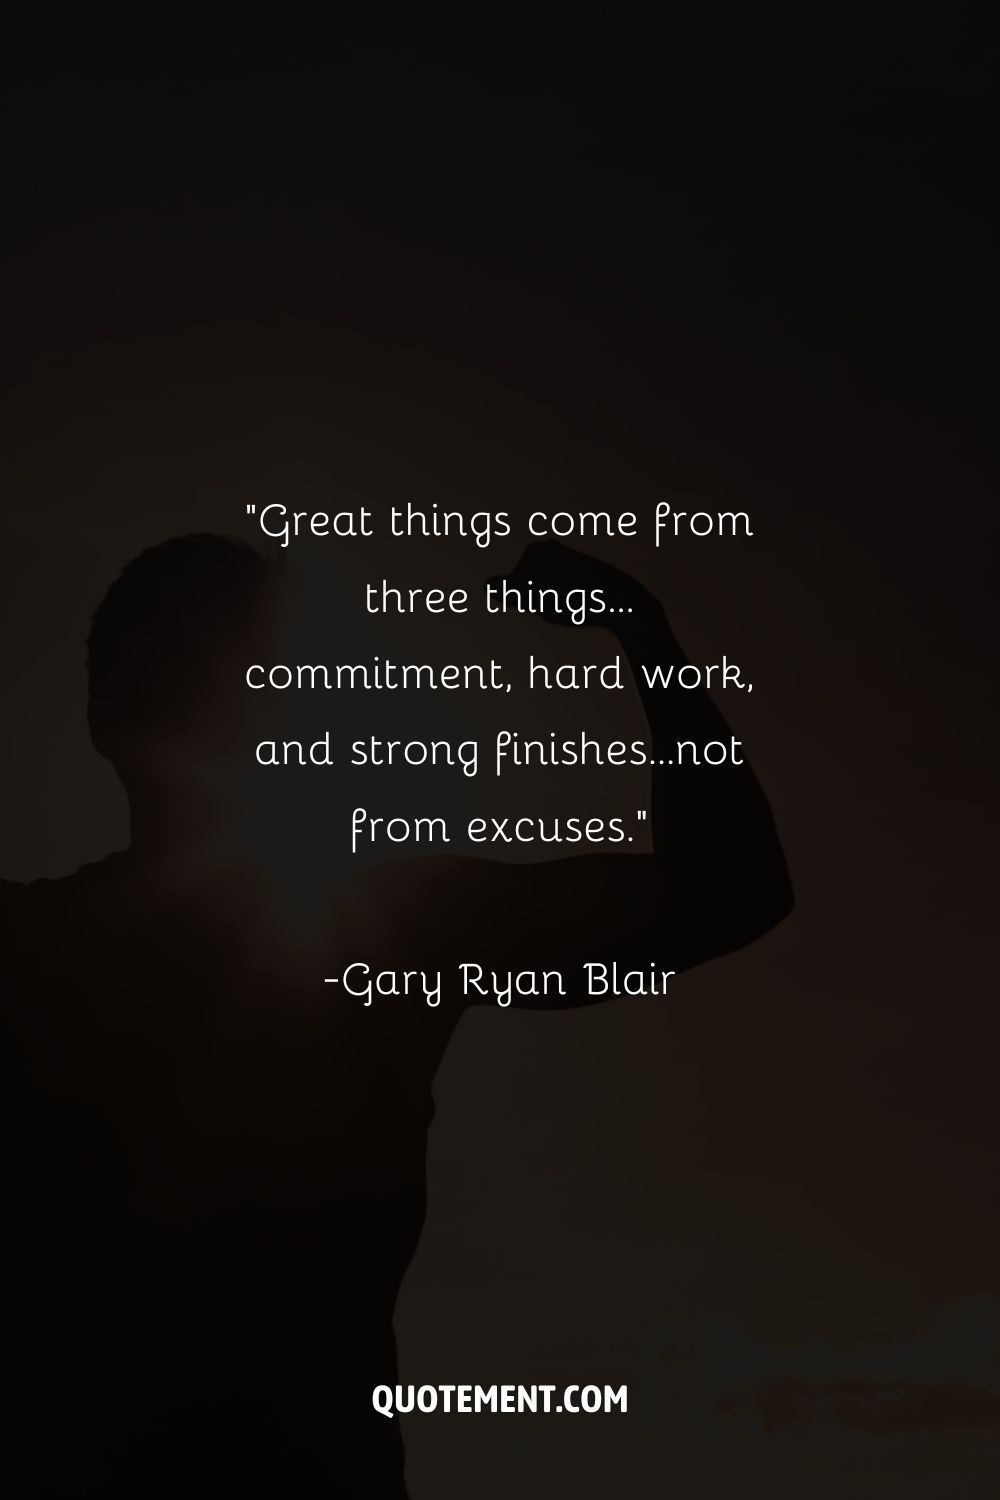 a silhouette of a man raising his arm representing motivational strong finish quote